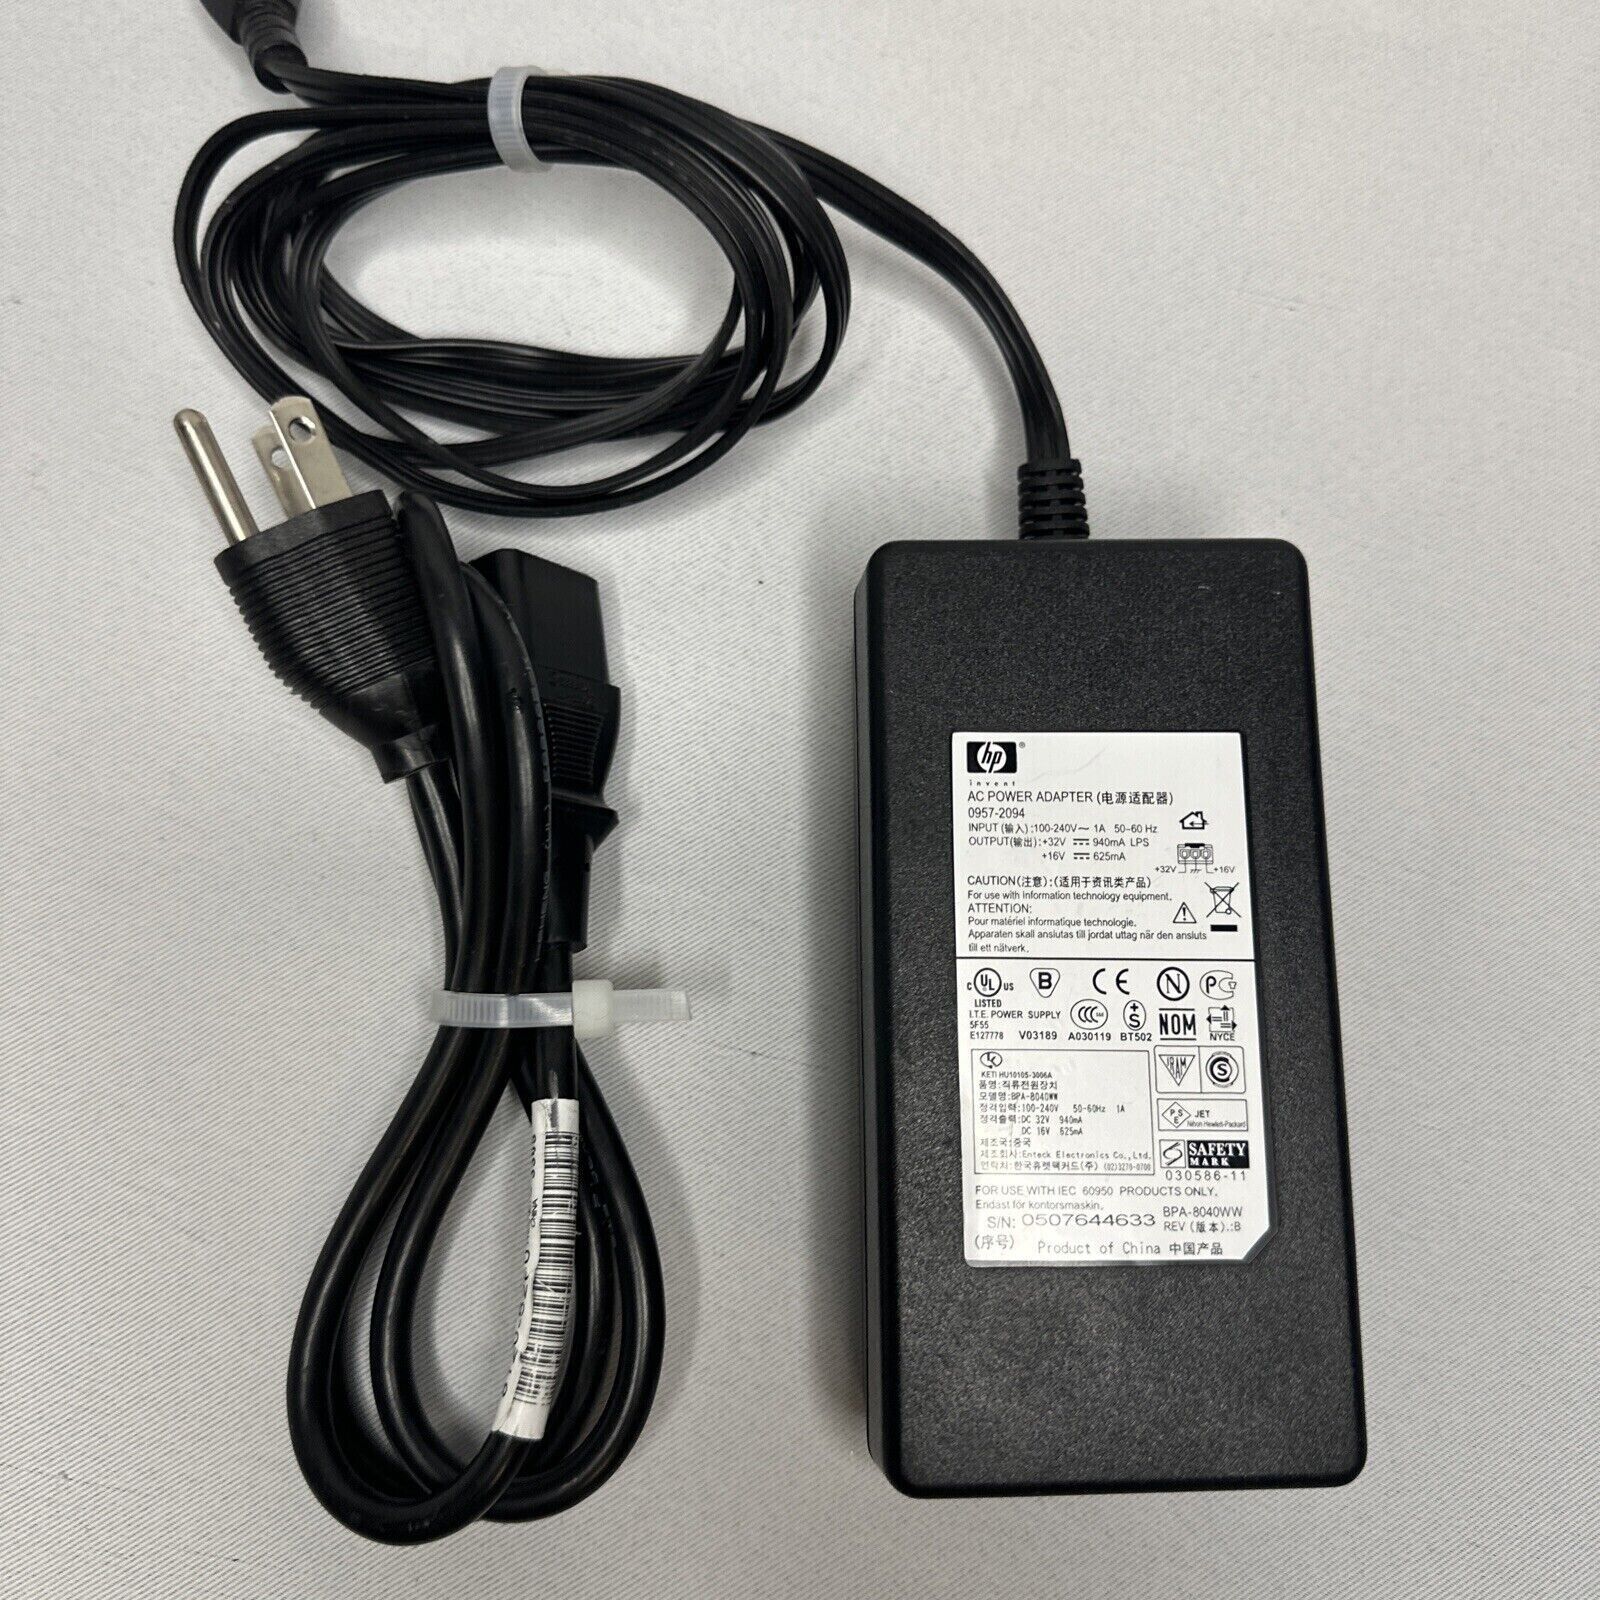 HP 0957-2094 OEM AC Adapter Power Supply with Cables OfficeJet PSC, Photosmart